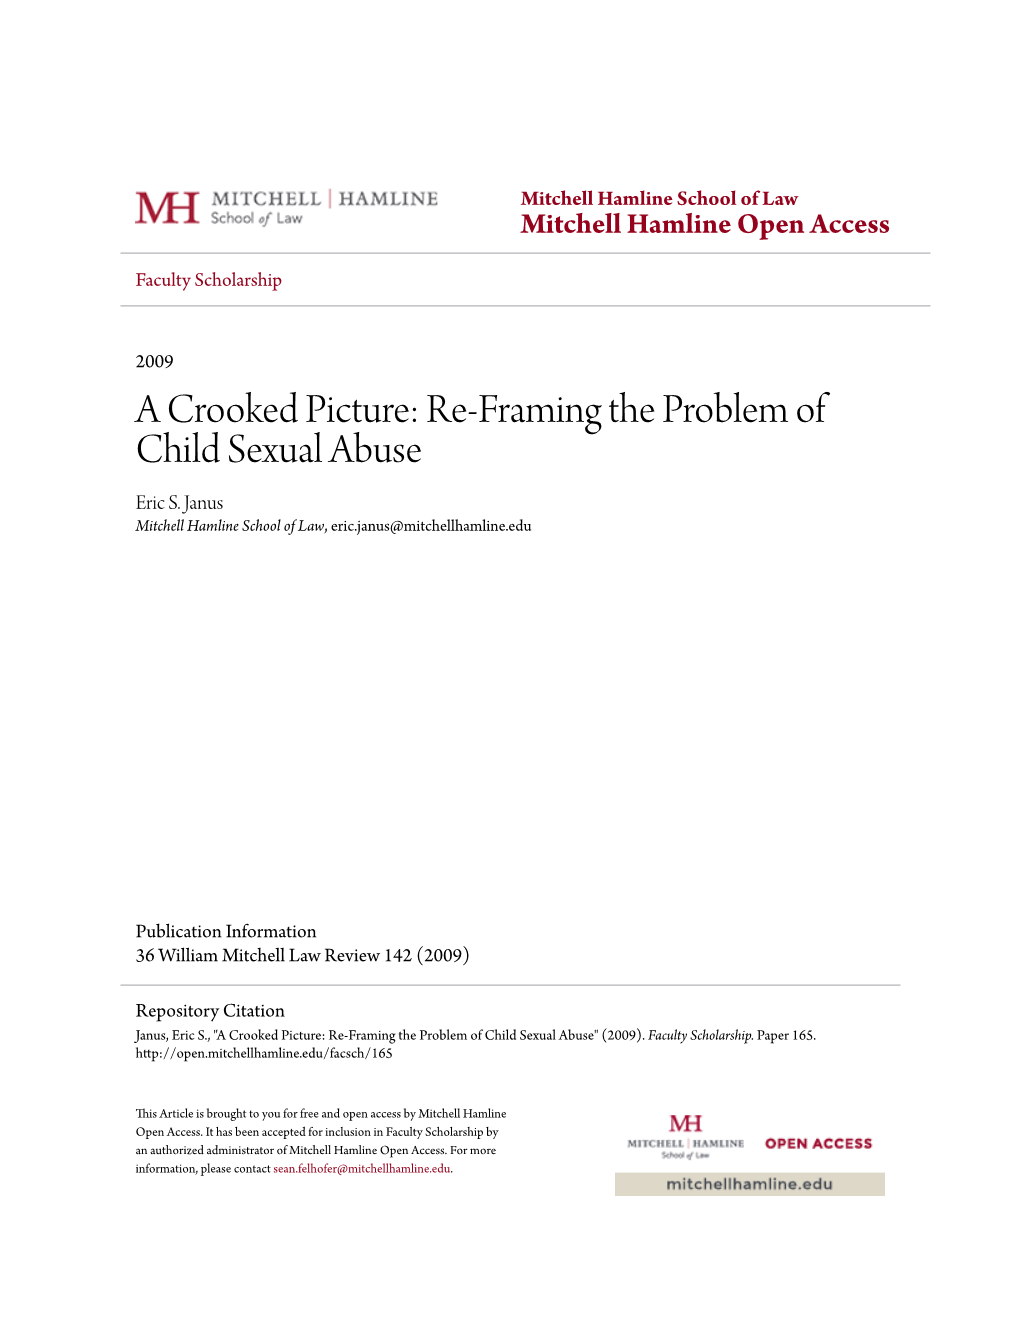 A Crooked Picture: Re-Framing the Problem of Child Sexual Abuse Eric S